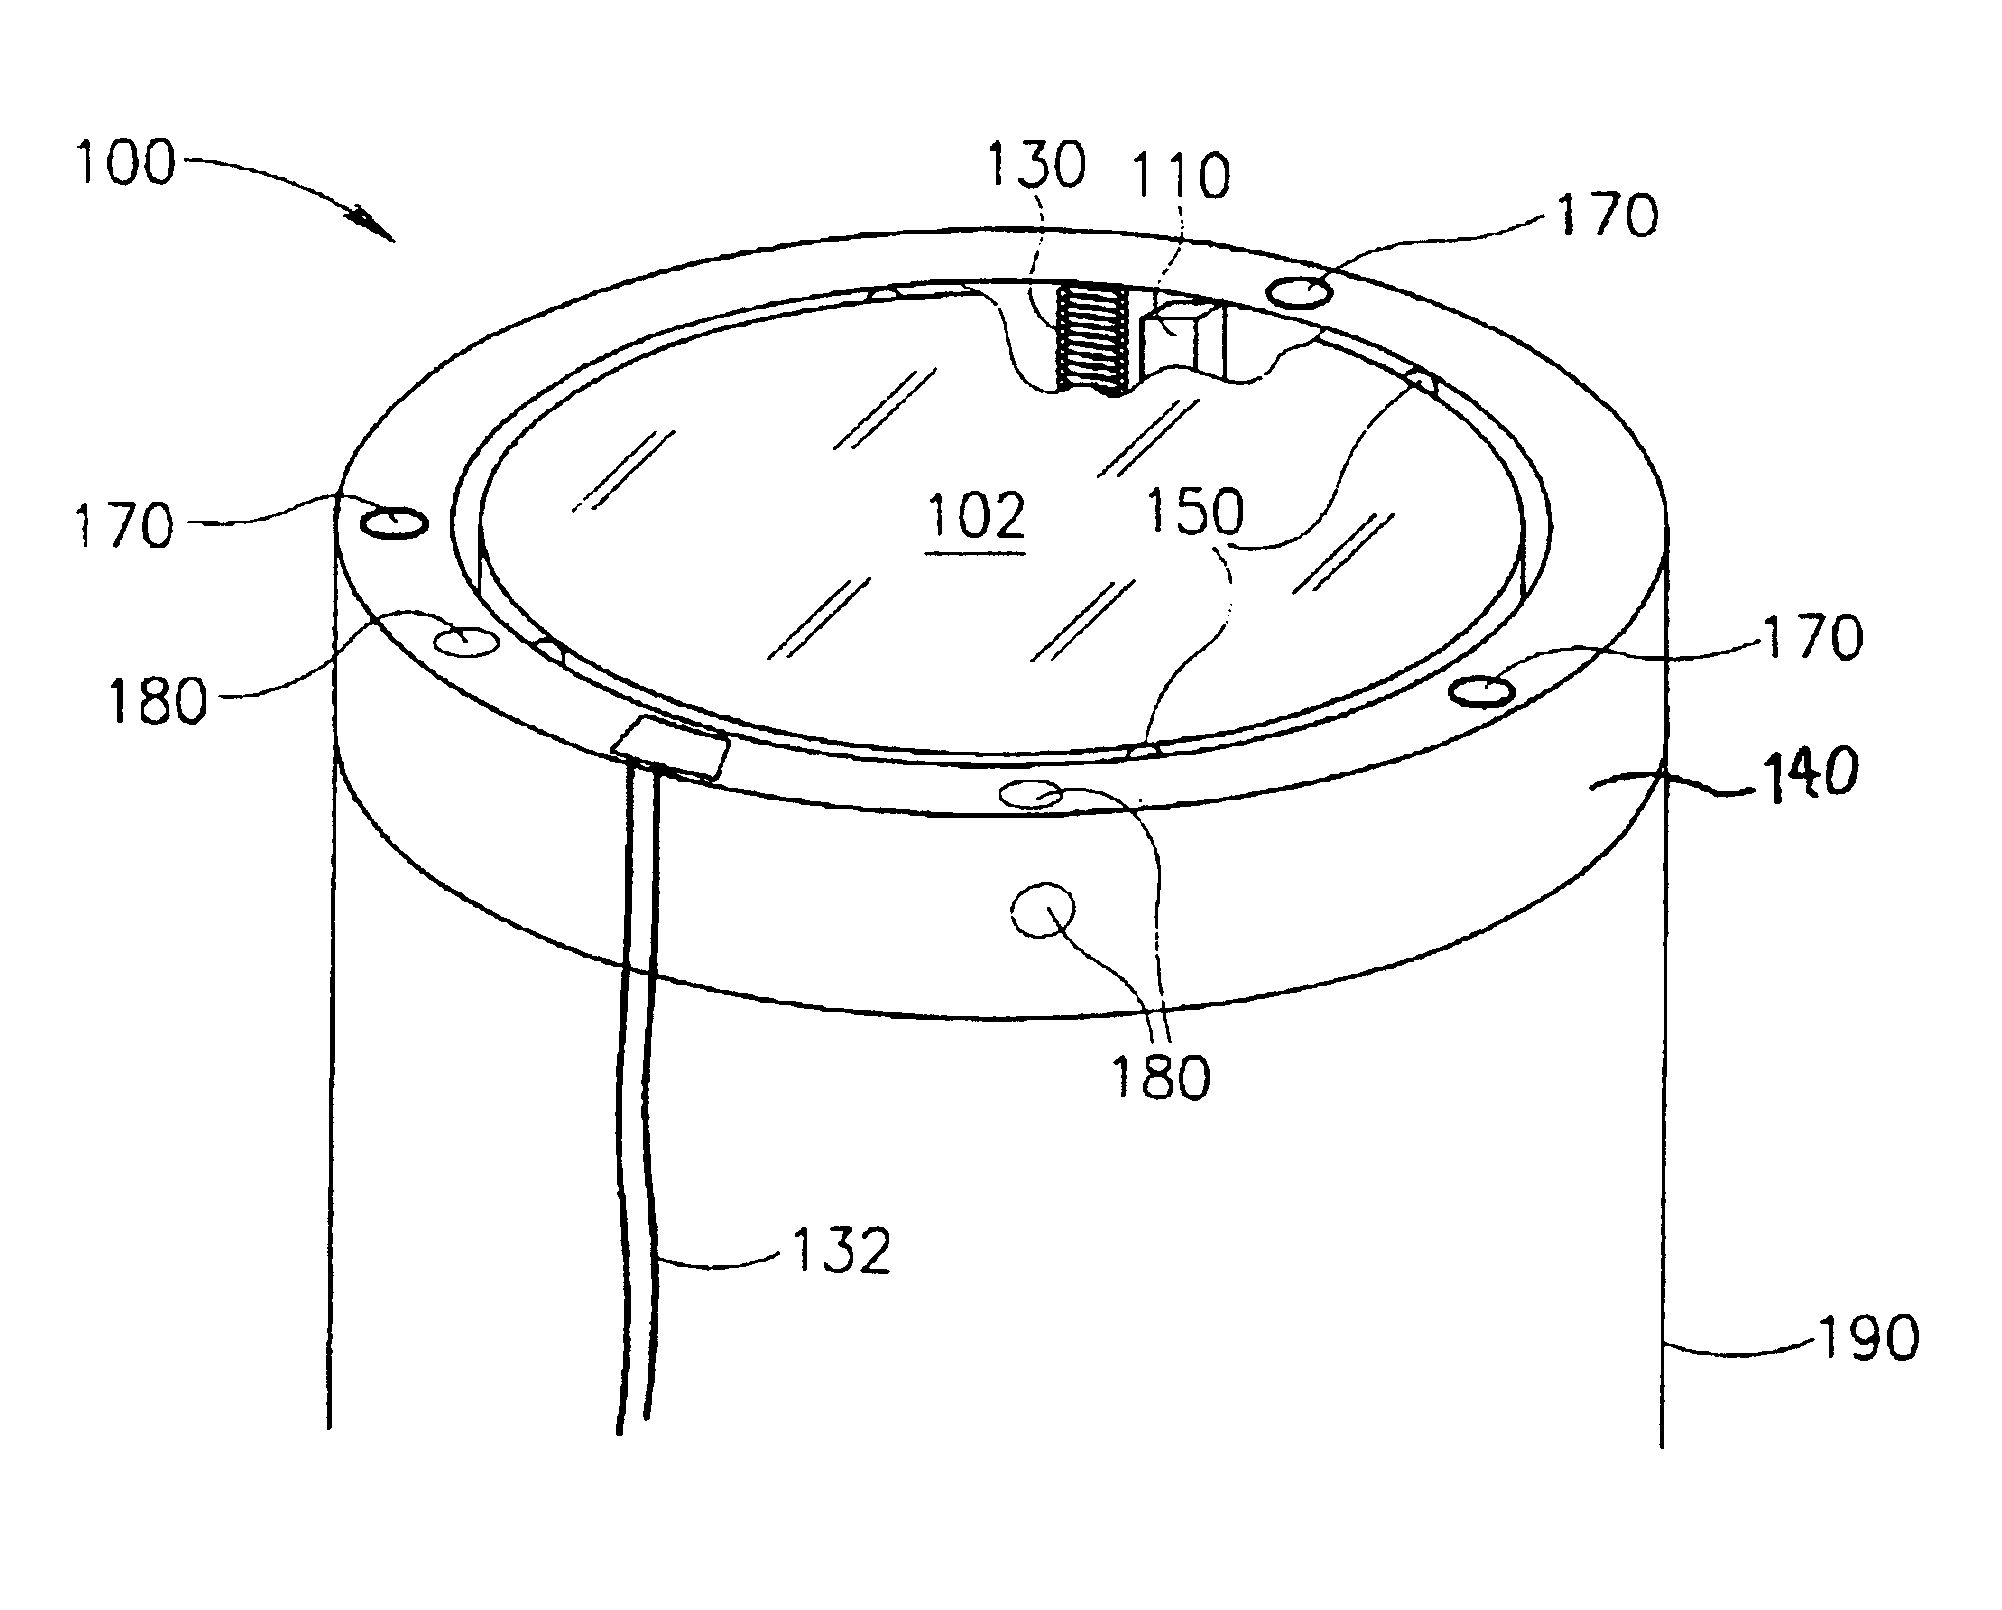 Lens protection for medical purposes